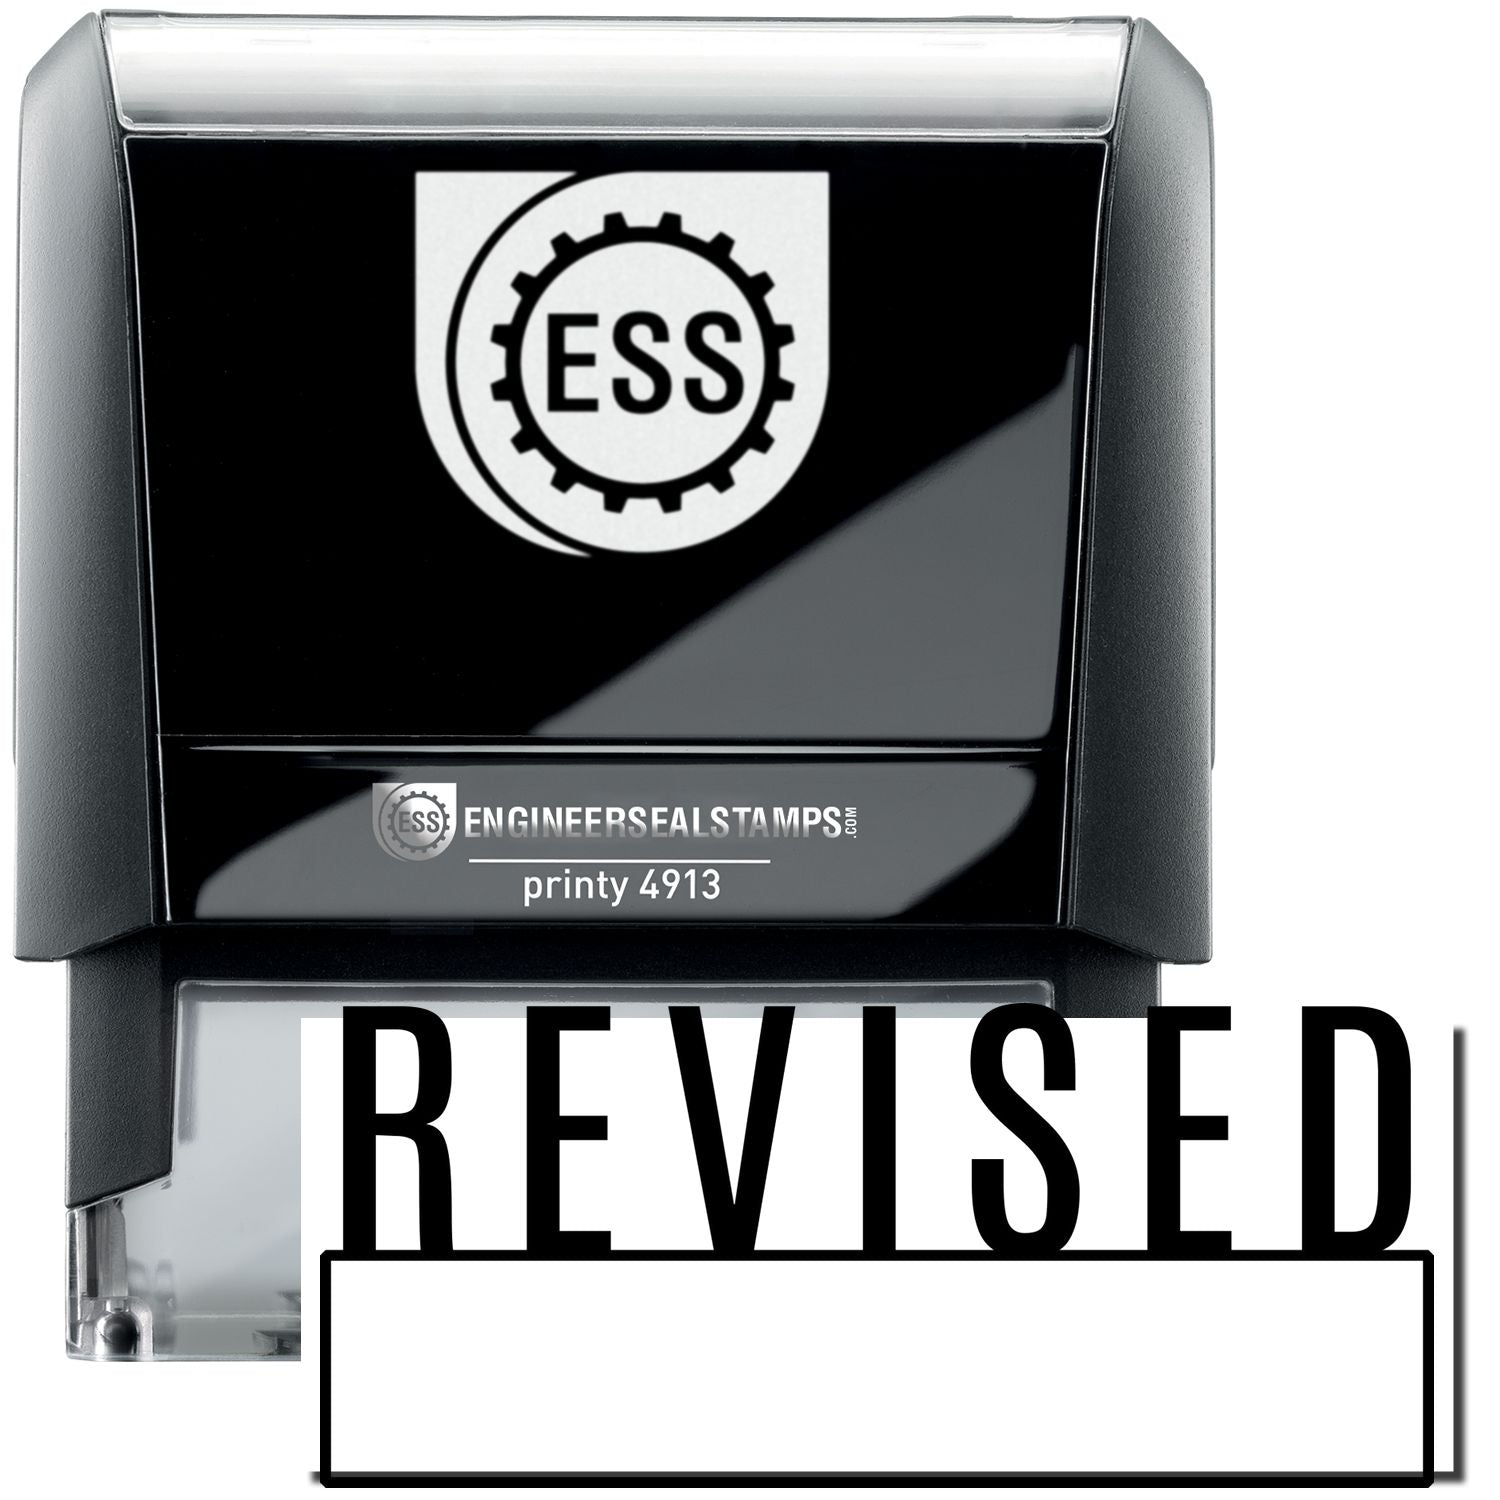 A self-inking stamp with a stamped image showing how the text "REVISED" in a large font with a Box under it is displayed after stamping.